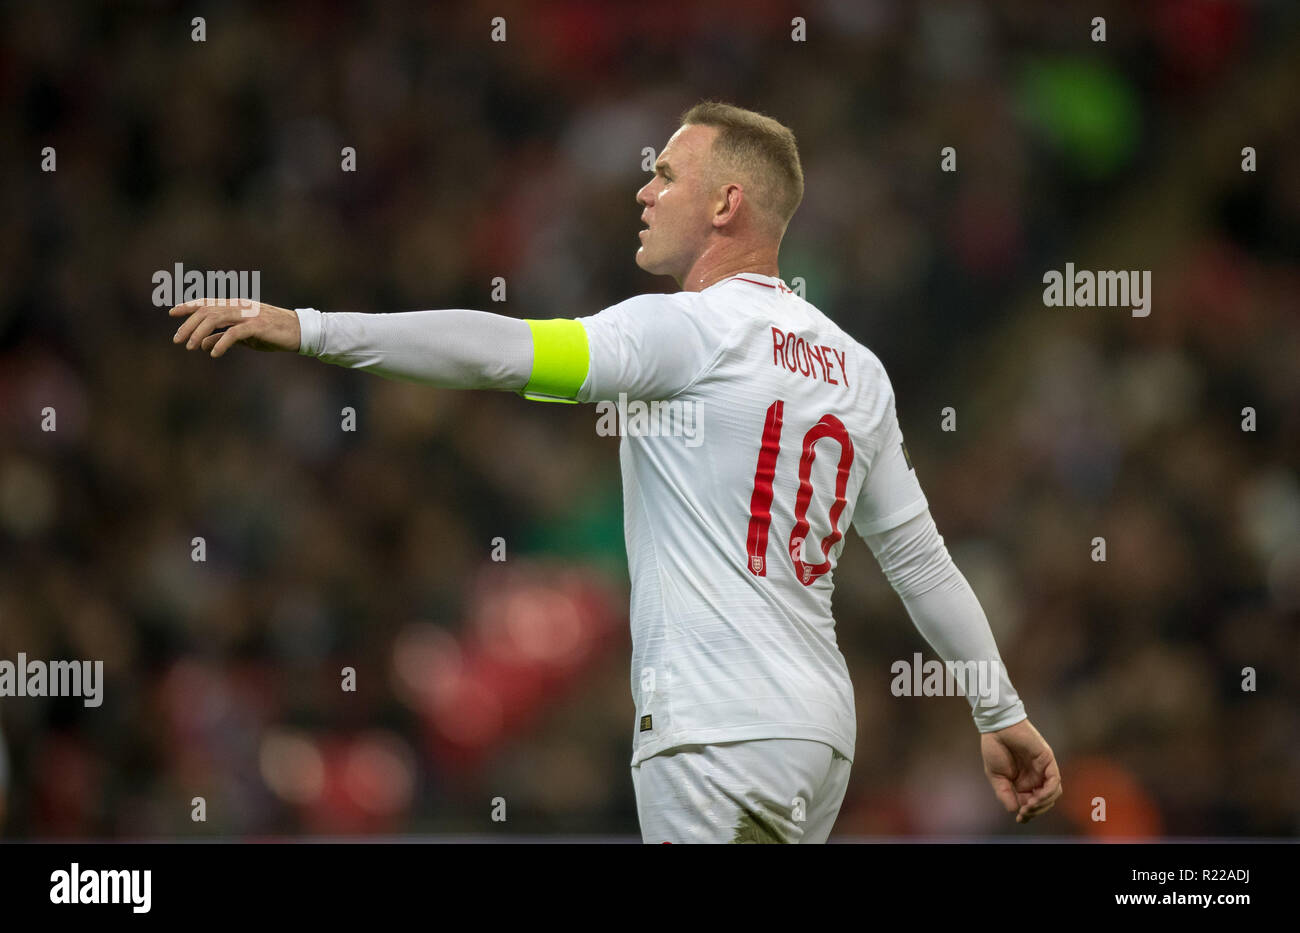 London, UK. 15th November, 2018. Wayne Rooney (D.C. United) of England during the International friendly match between England and USA at Wembley Stadium, London, England on 15 November 2018. Photo by Andy Rowland. . (Photograph May Only Be Used For Newspaper And/Or Magazine Editorial Purposes. www.football-dataco.com) Credit: Andrew Rowland/Alamy Live News Stock Photo